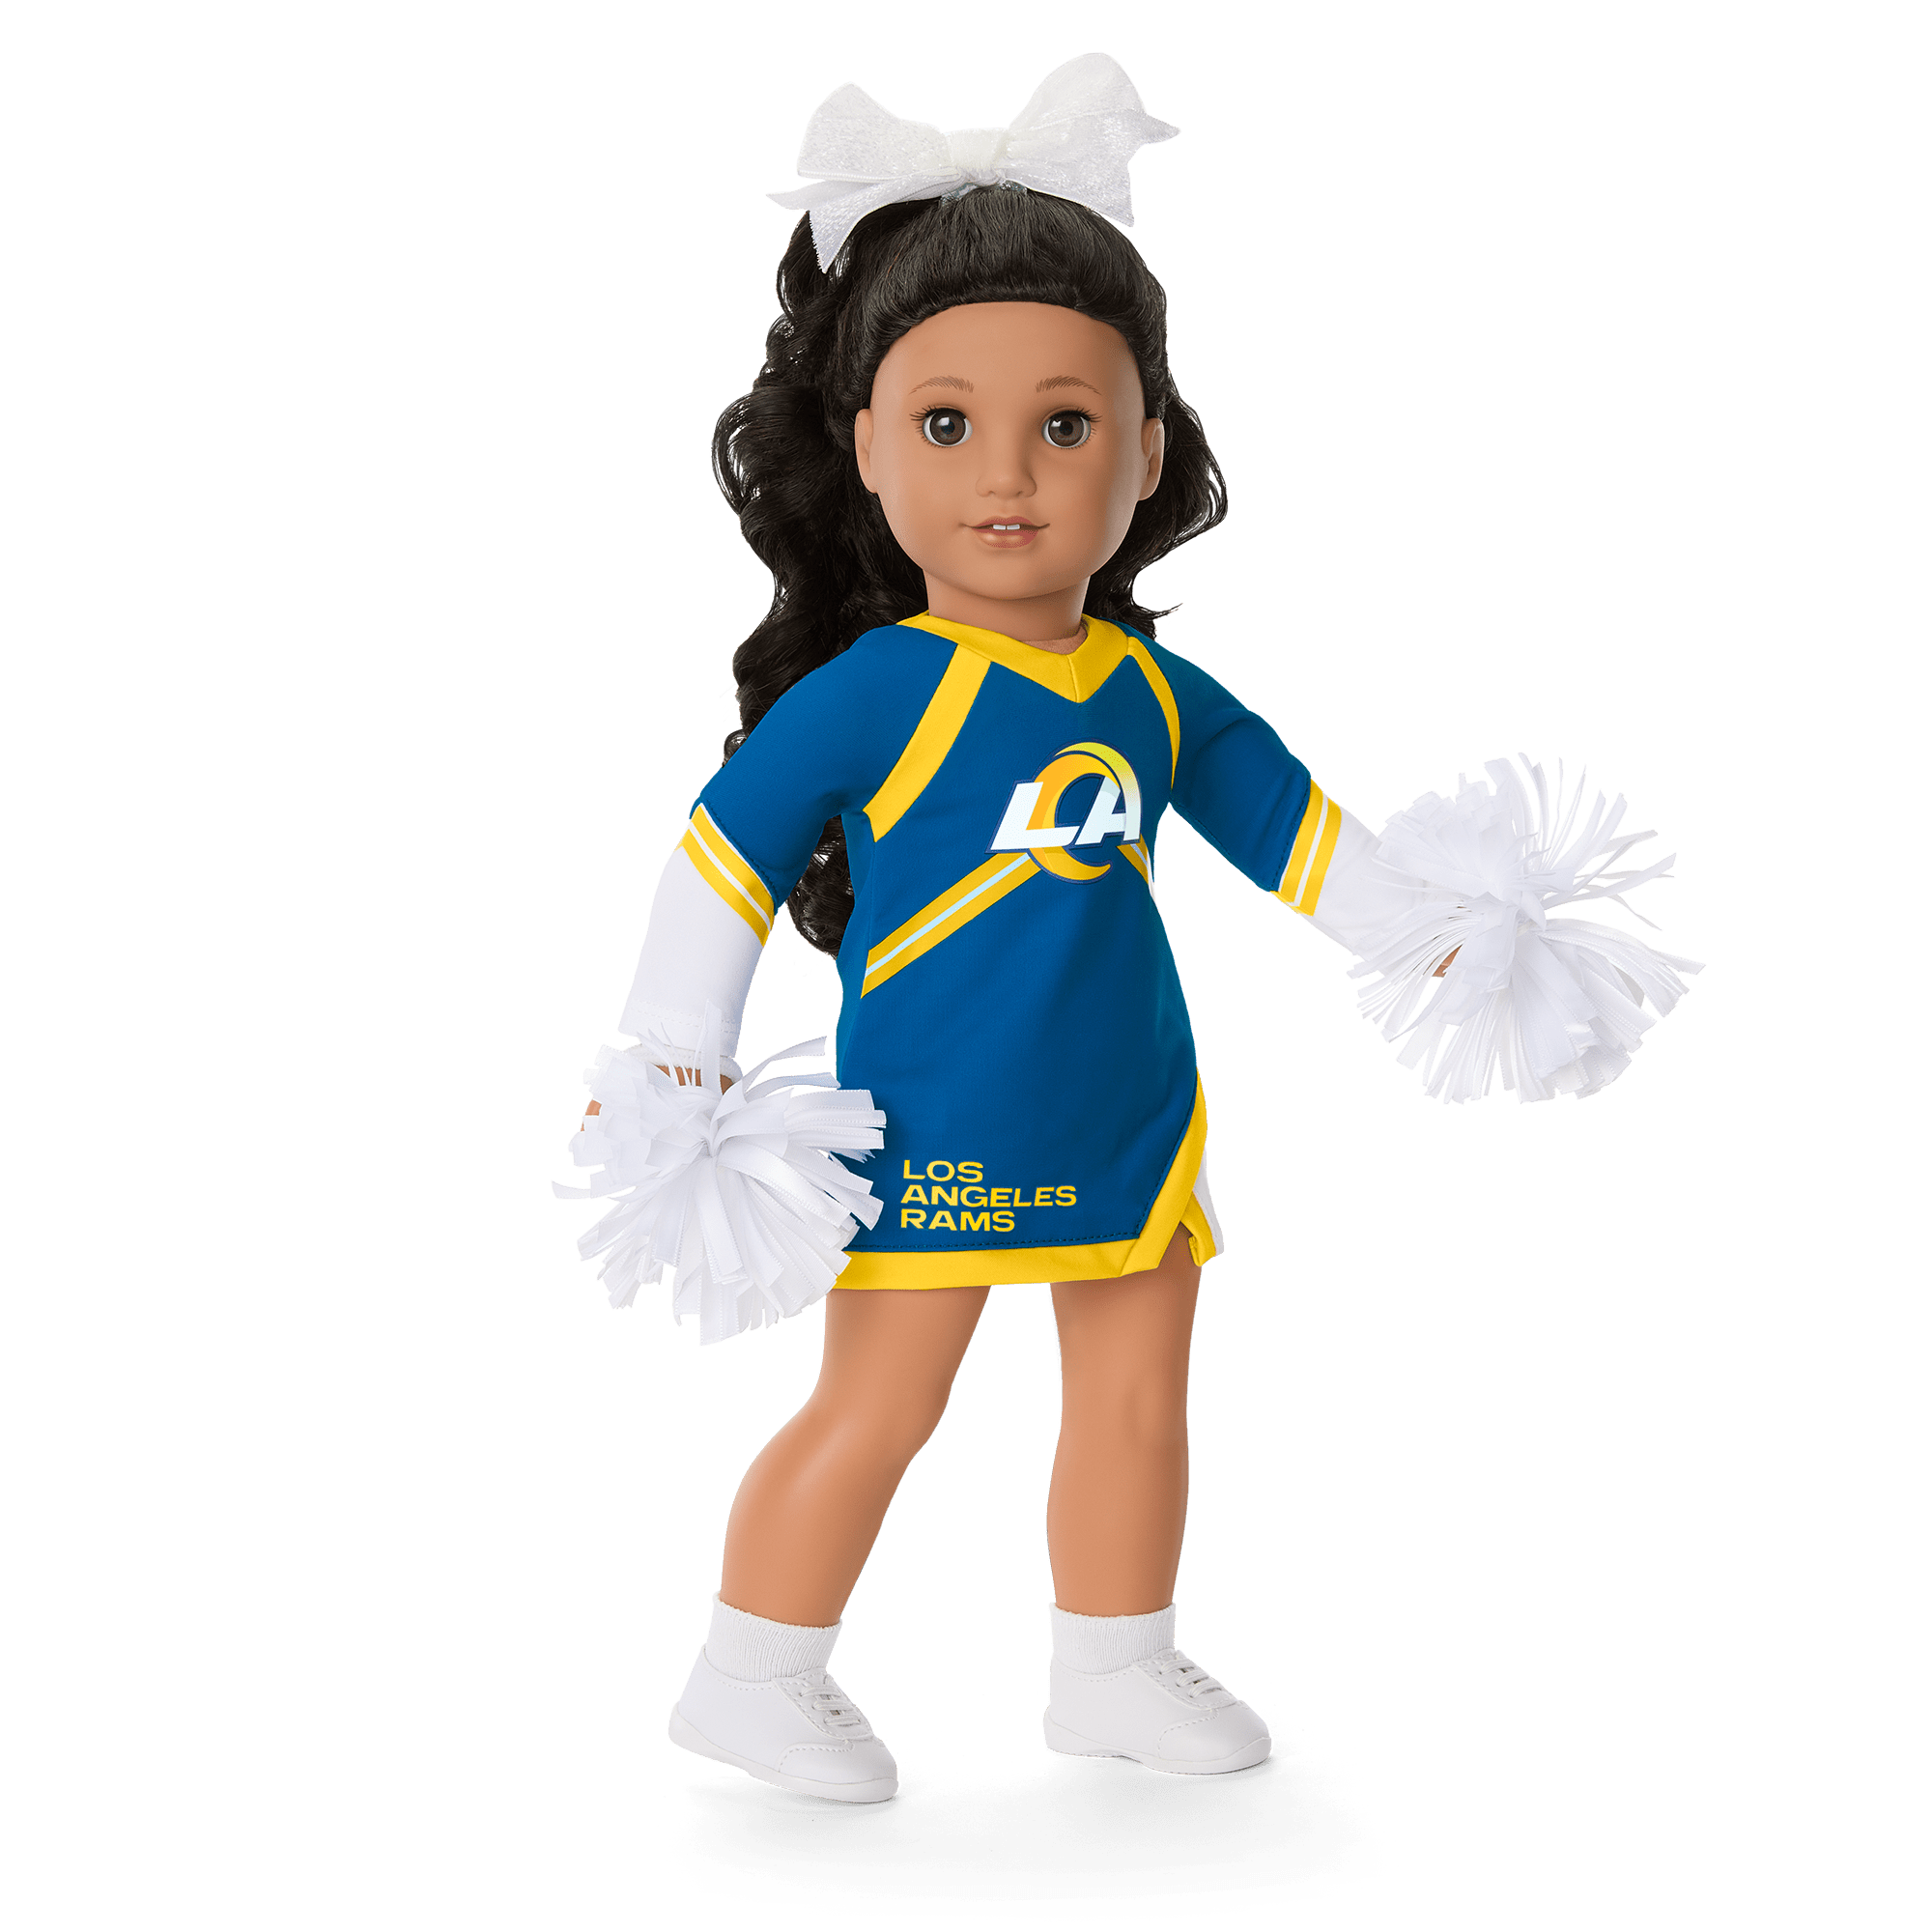 DELUXE Custom Cheerleader Uniform Set for 18 Doll Such as the